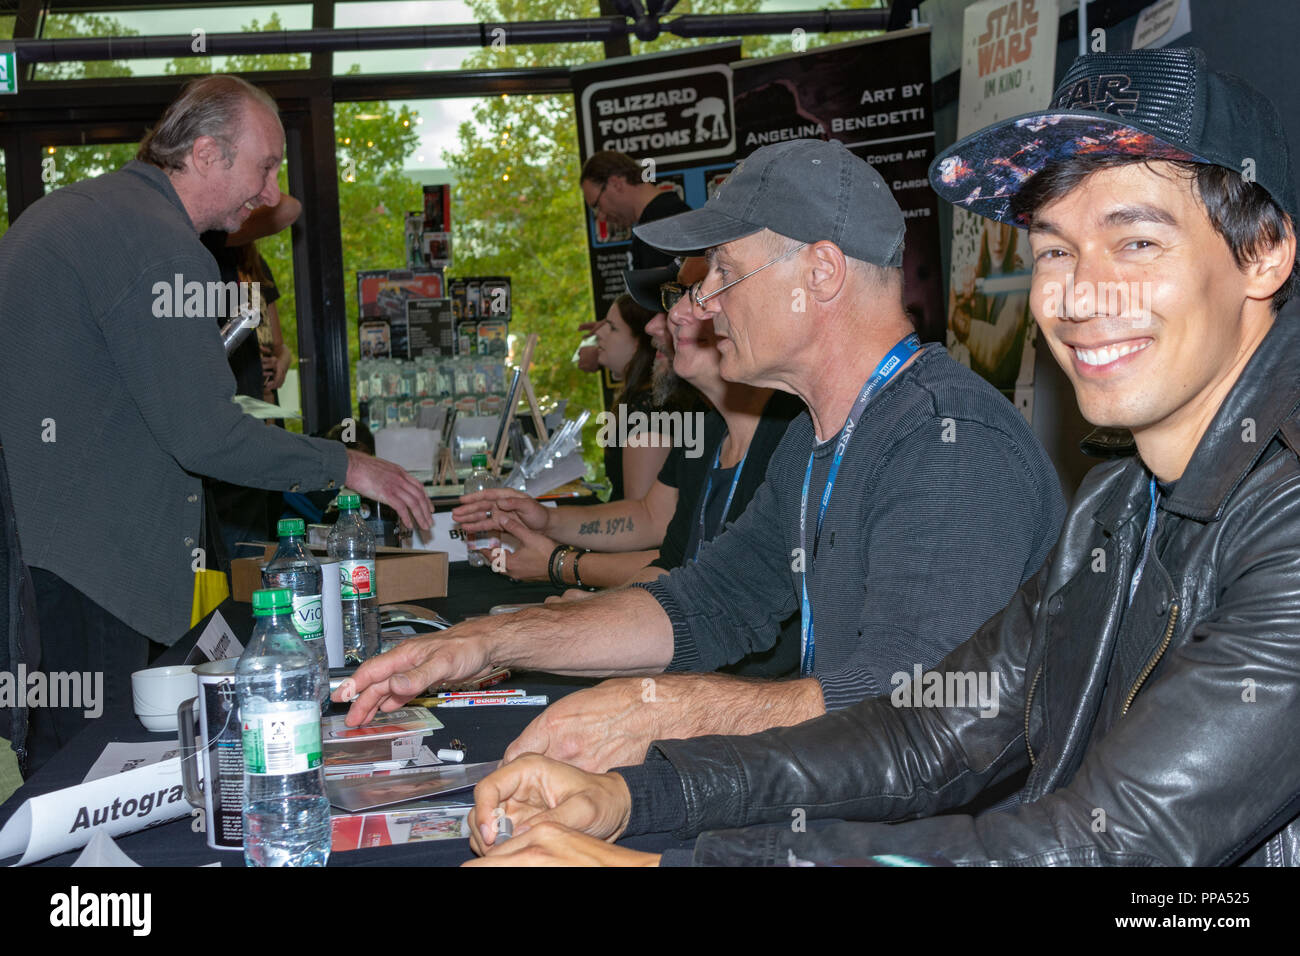 FUERTH, Germany - September 22nd 2018: Florian Clyde and Hans-Georg Panczak are happy to meet fans at Noris Force Con 5, a three day star wars fan con Stock Photo